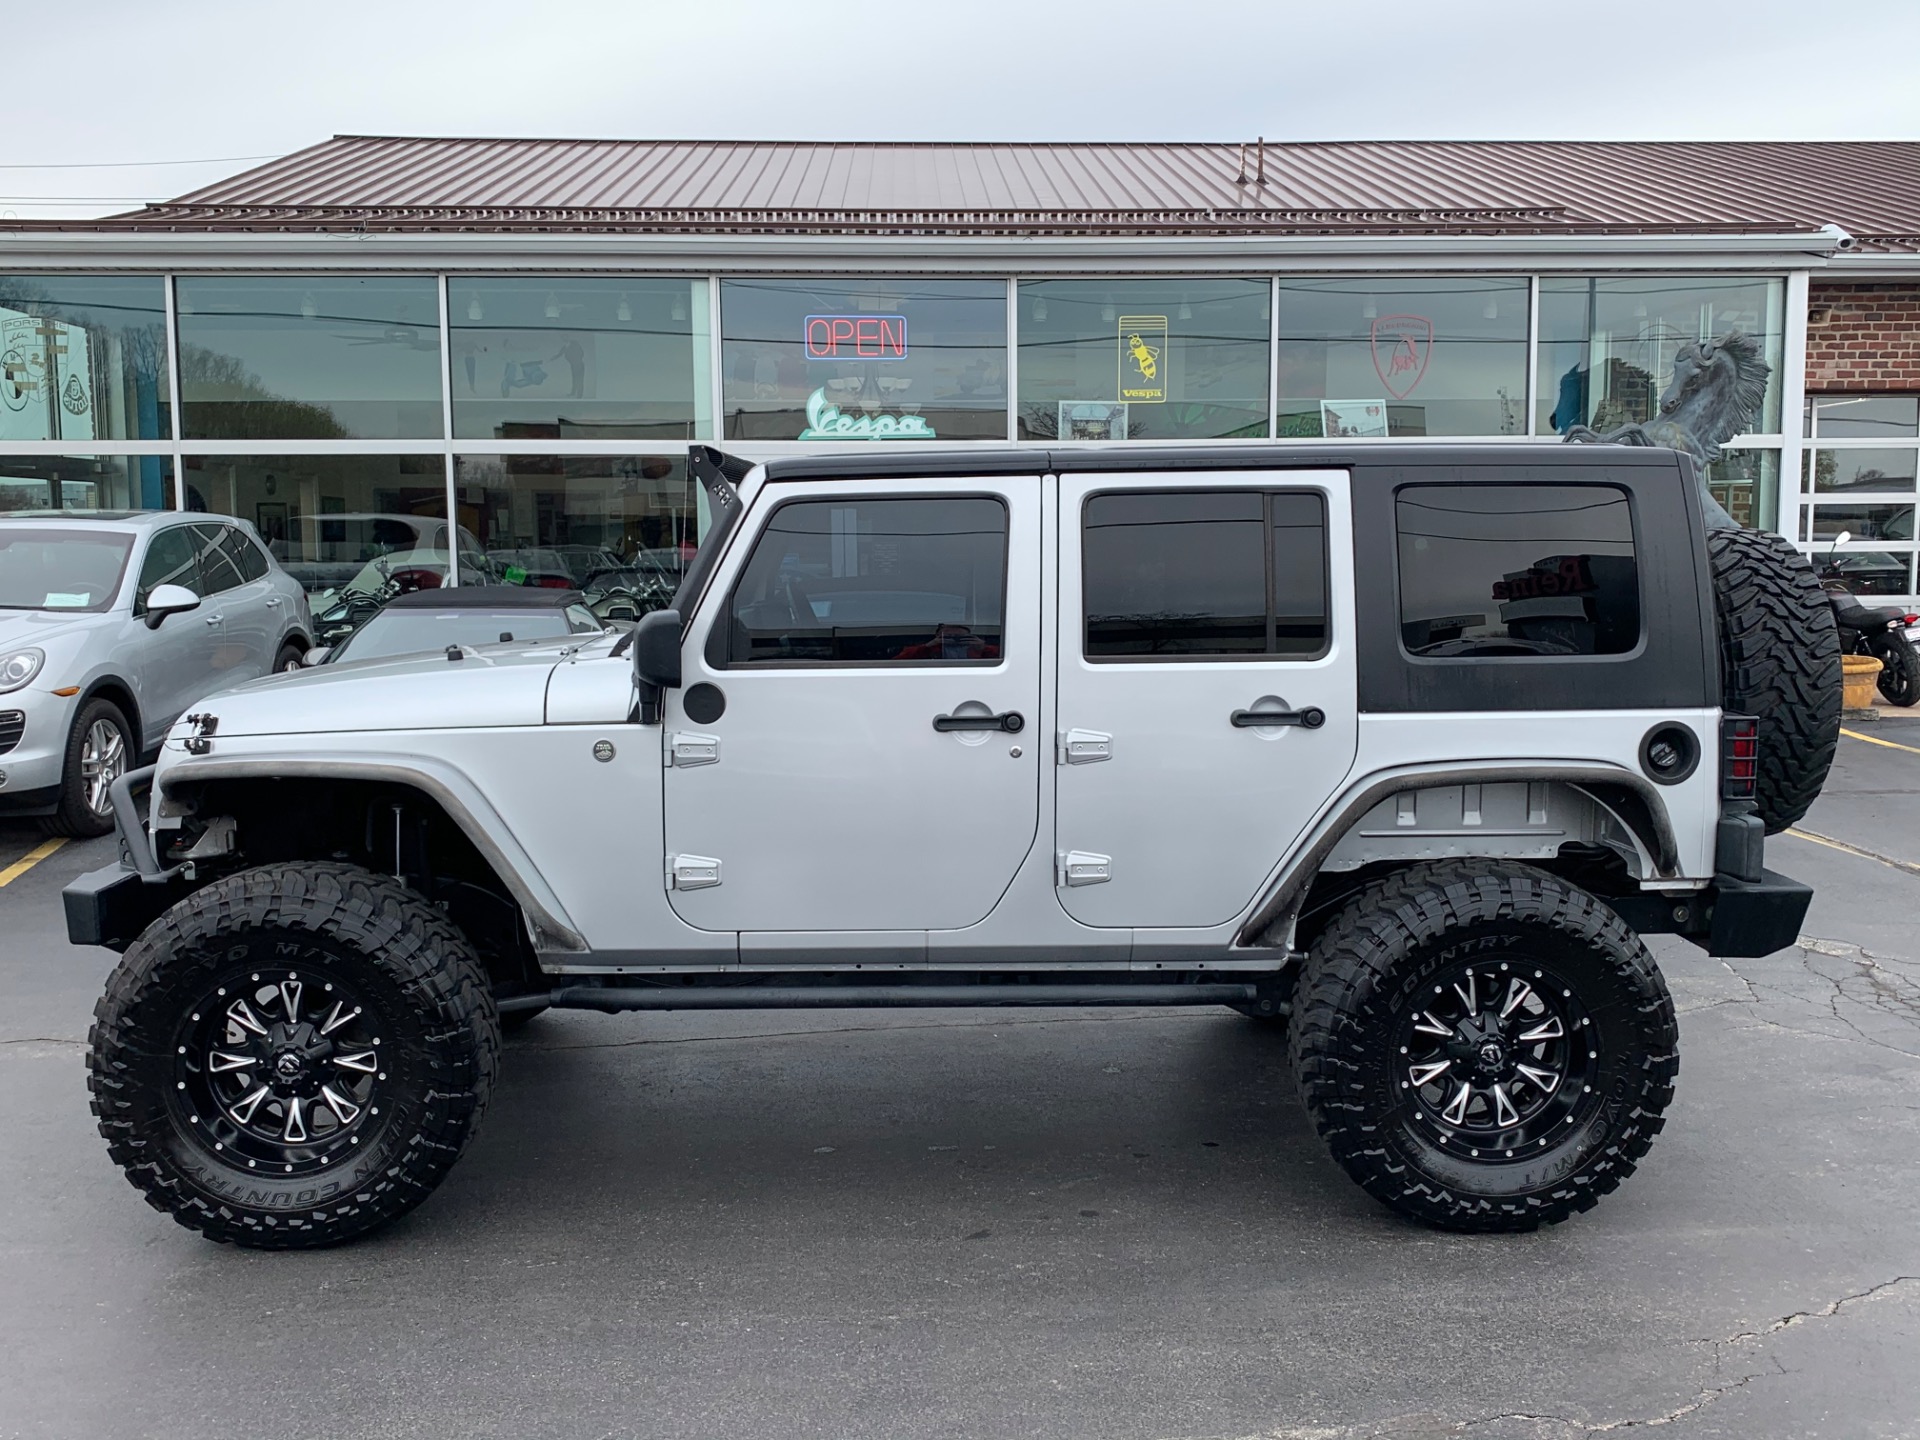 2007 Jeep Wrangler Unlimited Sahara 4x4 Rubicon Express Lift Stock # 0367 for  sale near Brookfield, WI | WI Jeep Dealer